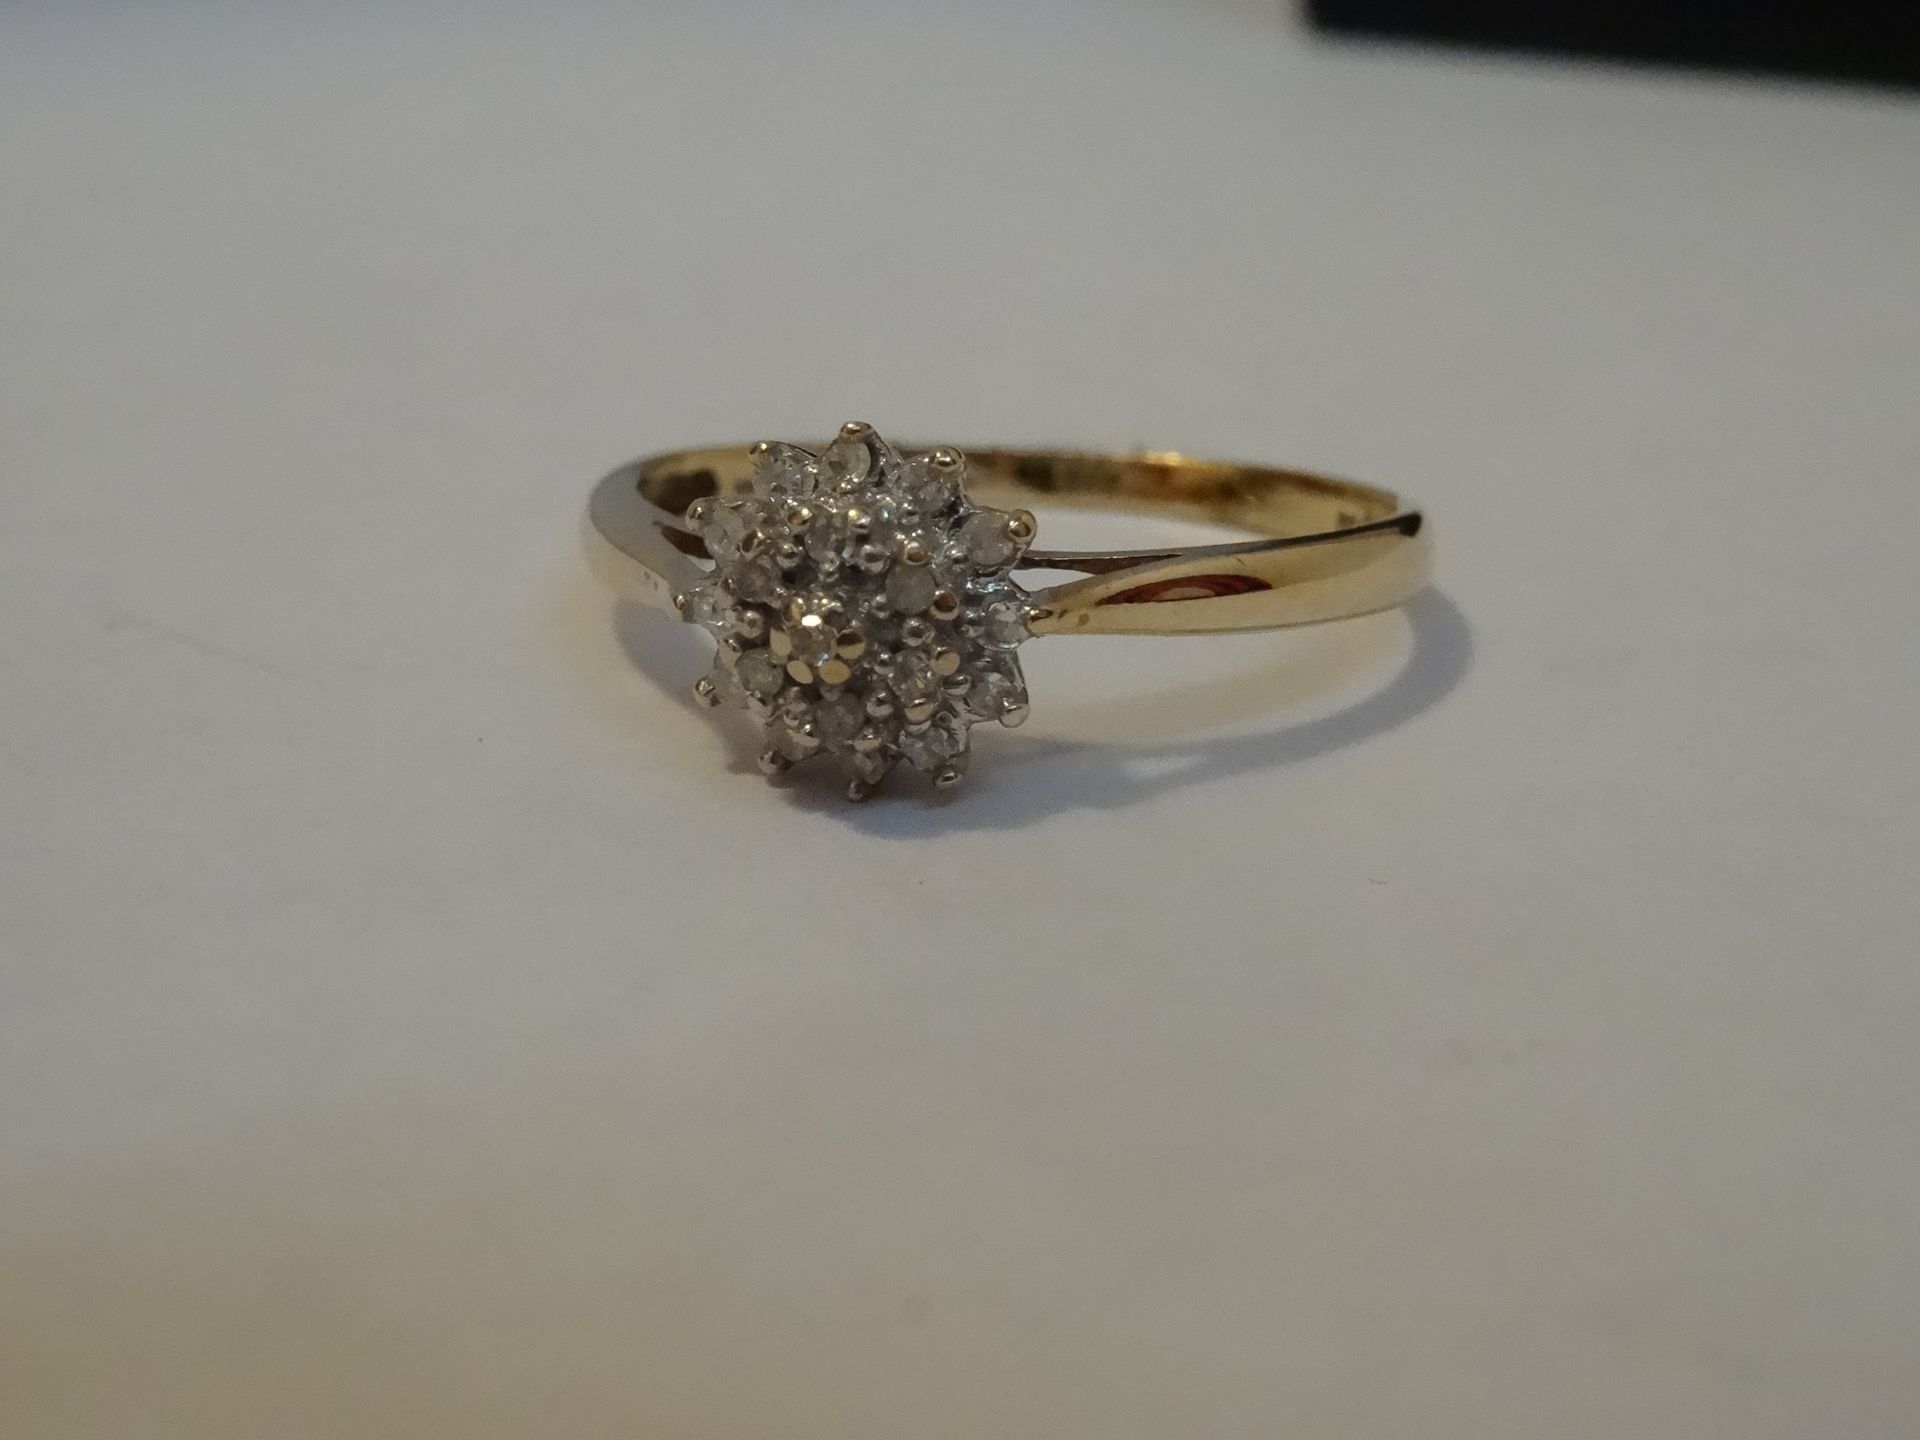 9 Carat Yellow Gold Diamond Cluster Ring. Total Piece Weight 1.59 Grams - Image 3 of 3